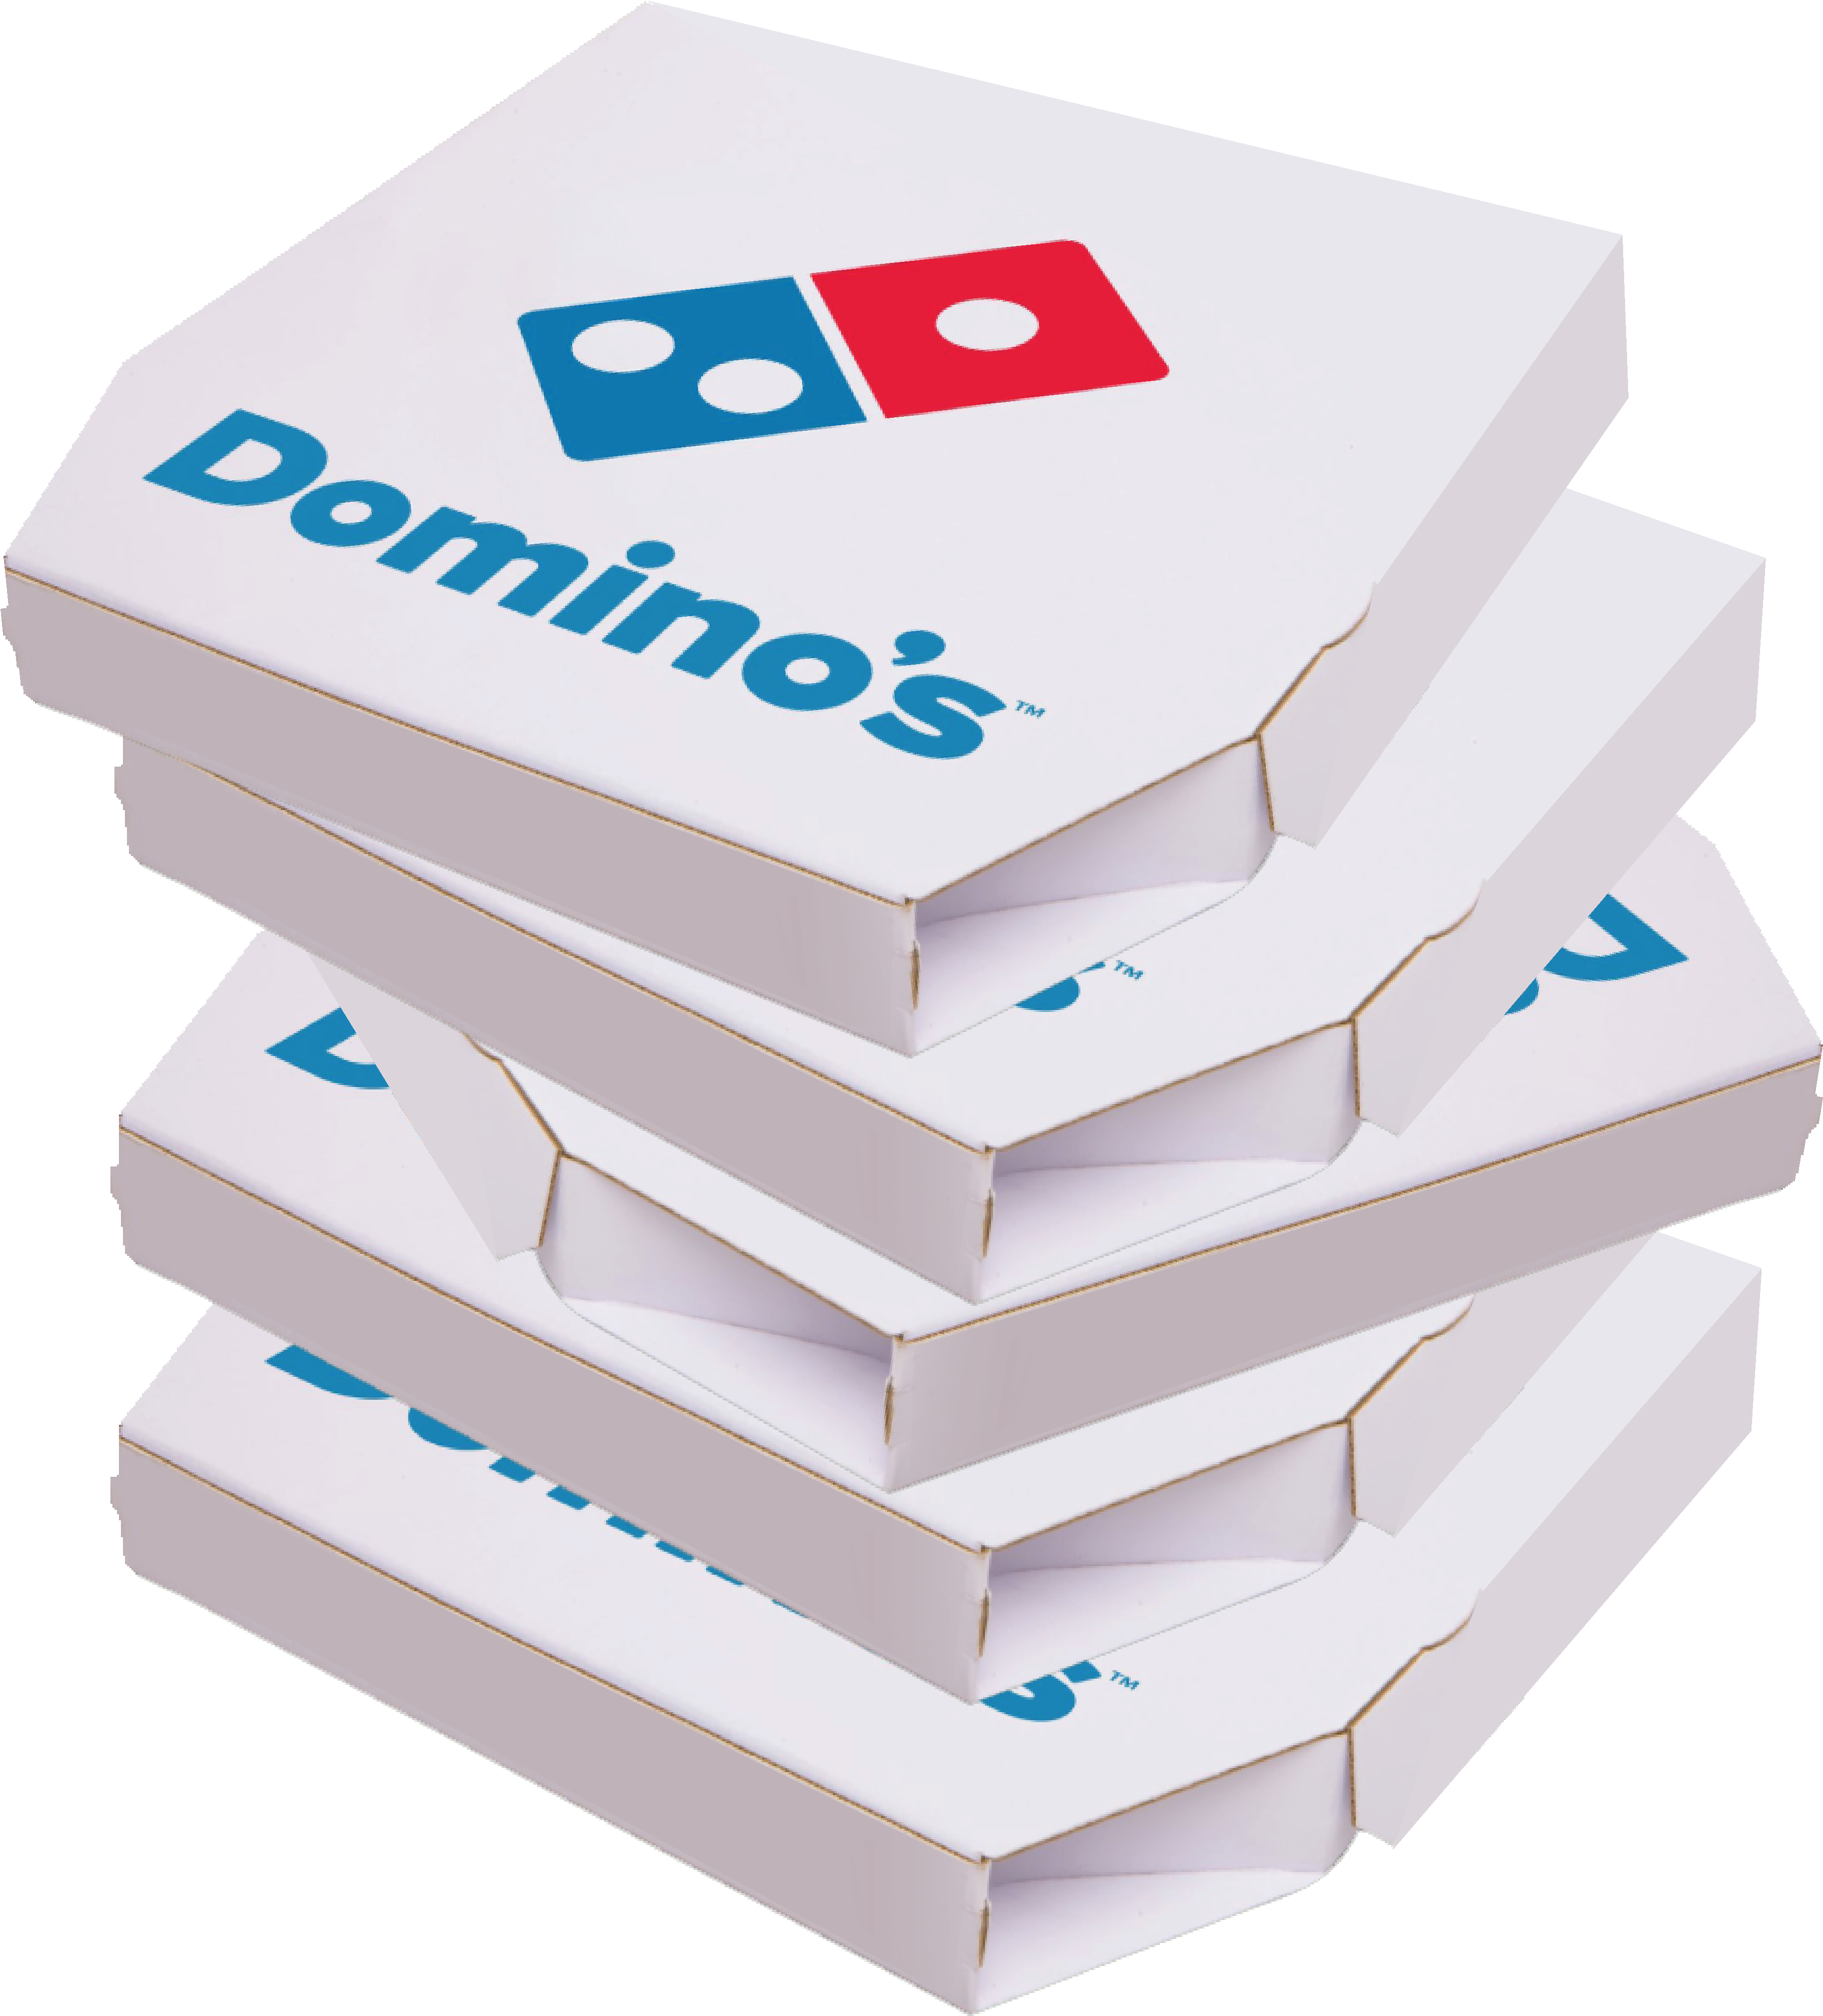 Stackof Dominos Pizza Boxes